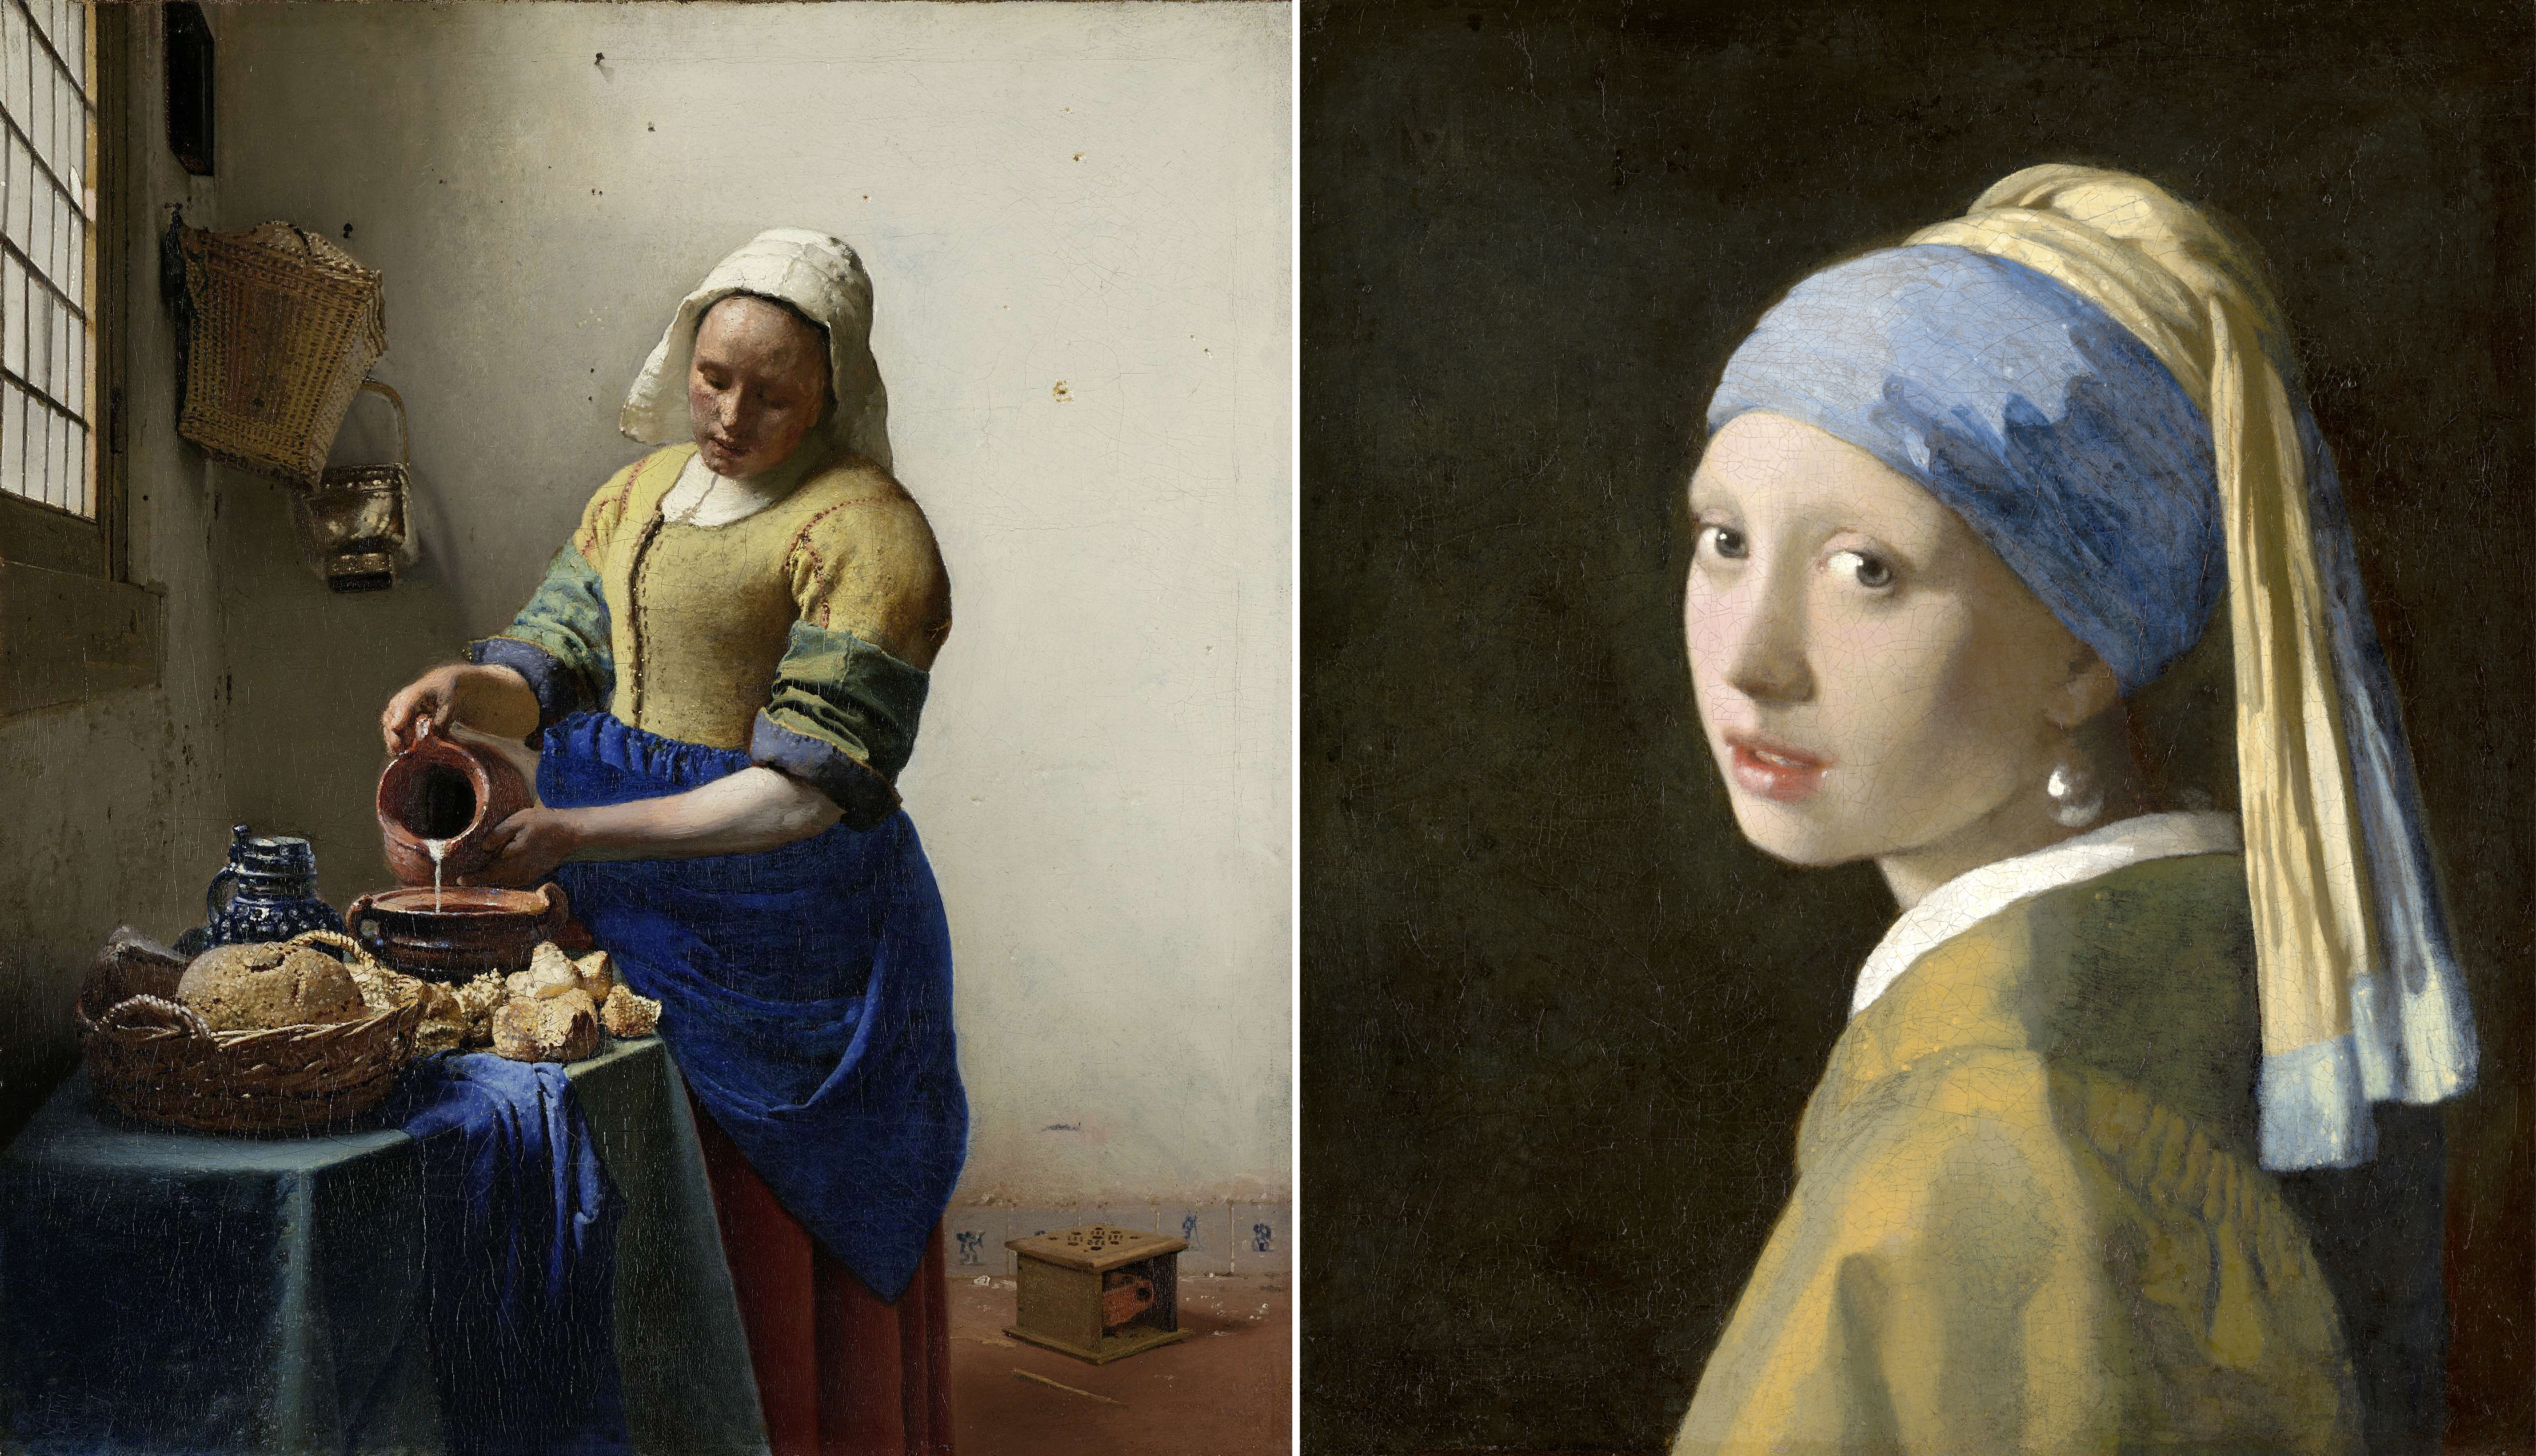 Left, Johannes Vermeer, ‘The Milkmaid,’ circa 1660; right, Johannes Vermeer, ‘The Girl with a Pearl Earring,’ 1665. Both works will appear in a blockbuster show opening in February 2023 at the Rijksmuseum in Amsterdam that will feature 27 of the 35 known works by Vermeer. Images courtesy of the Rijksmuseum